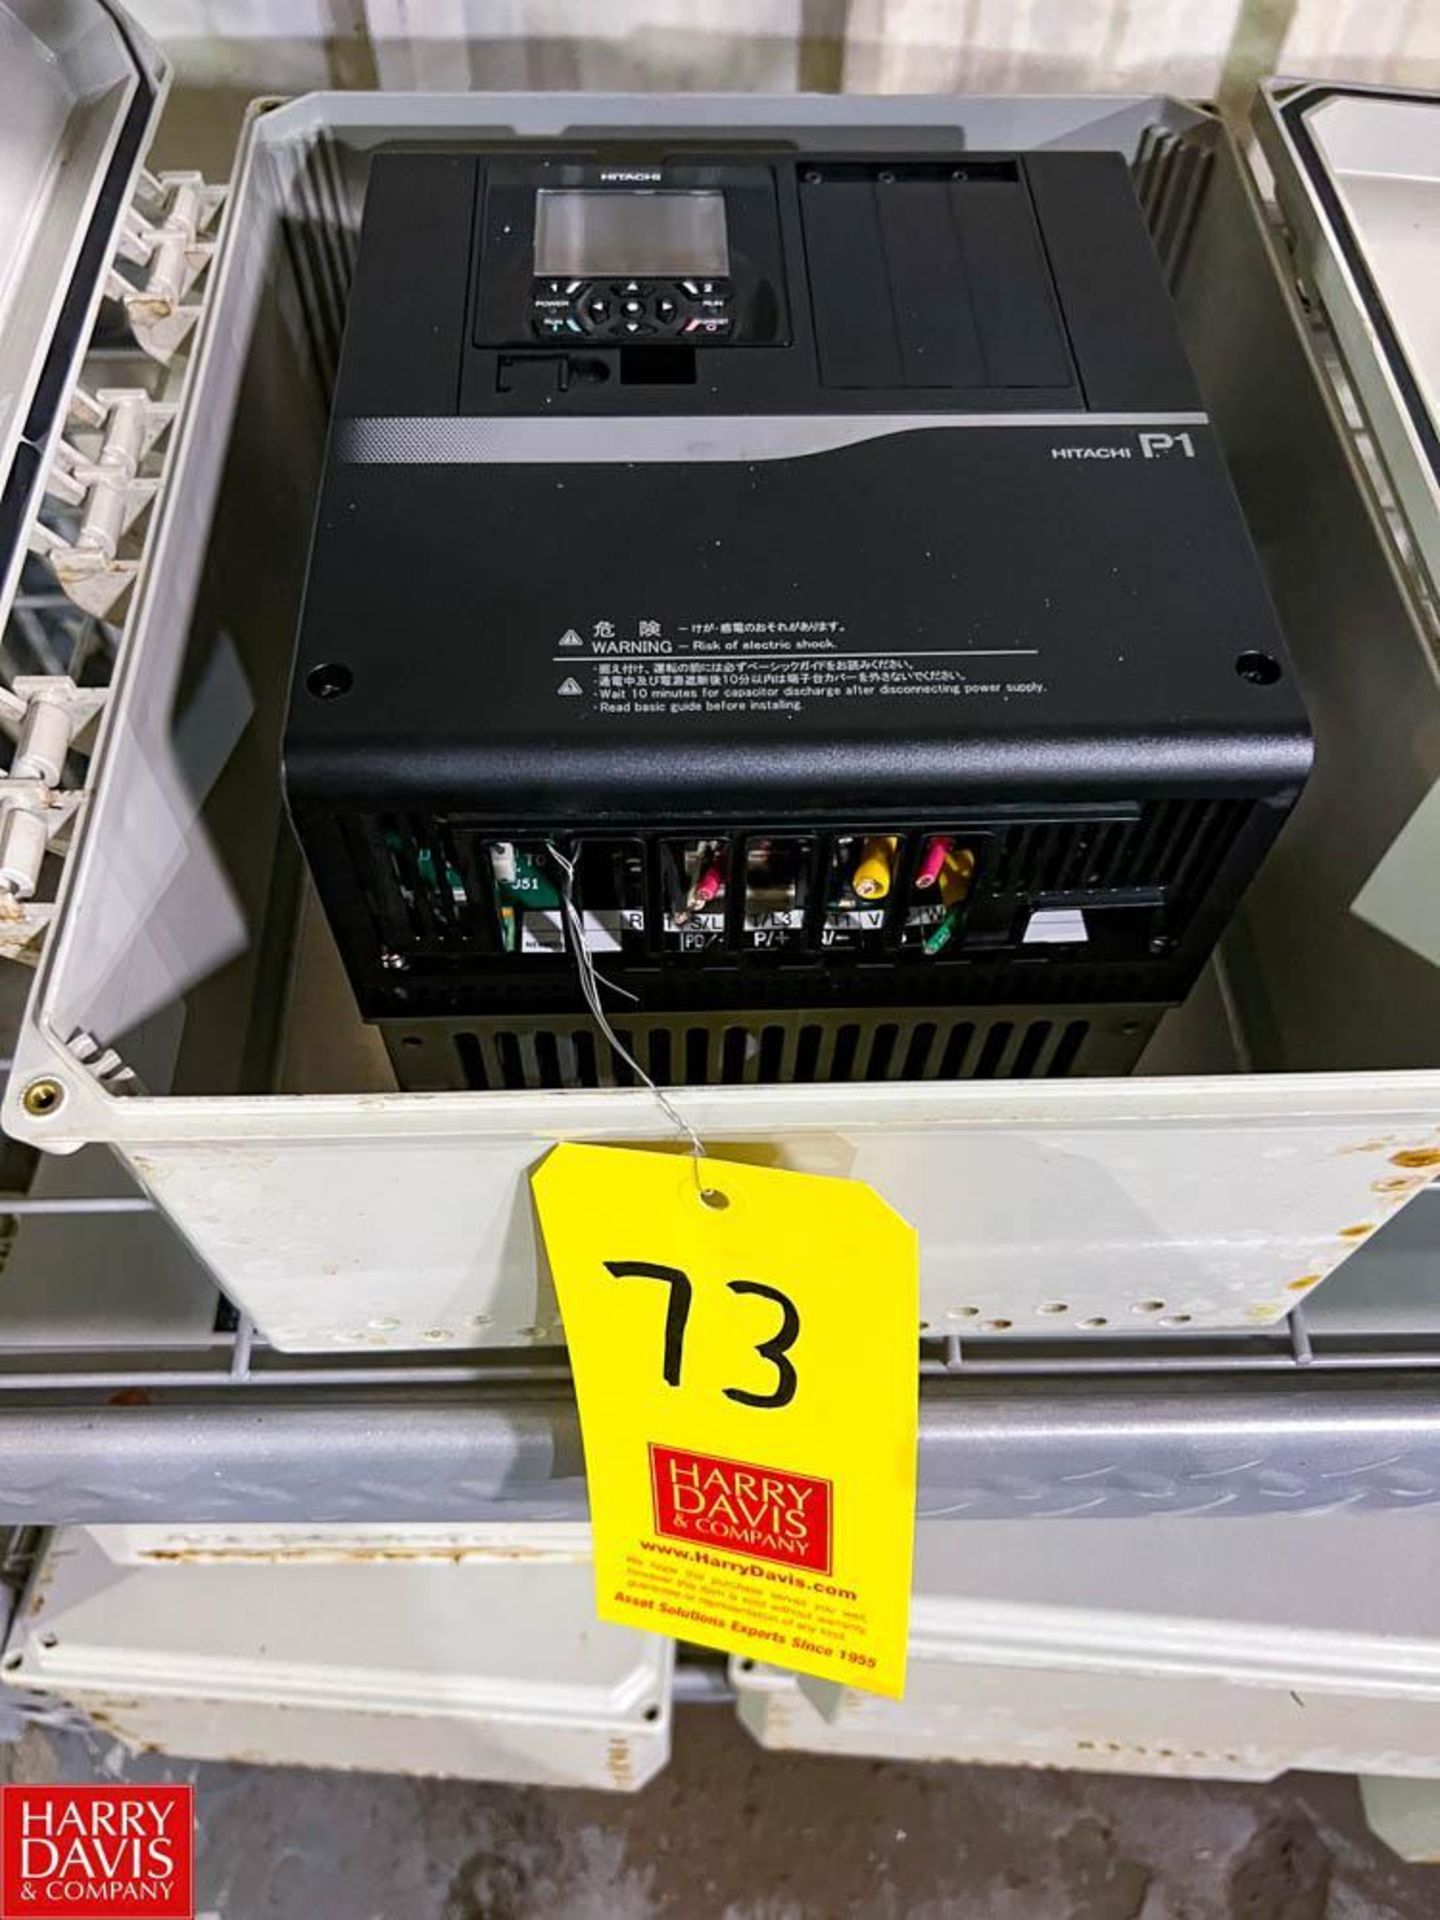 Hitachi P1 Variable Frequency Drive - Rigging Fee: $75